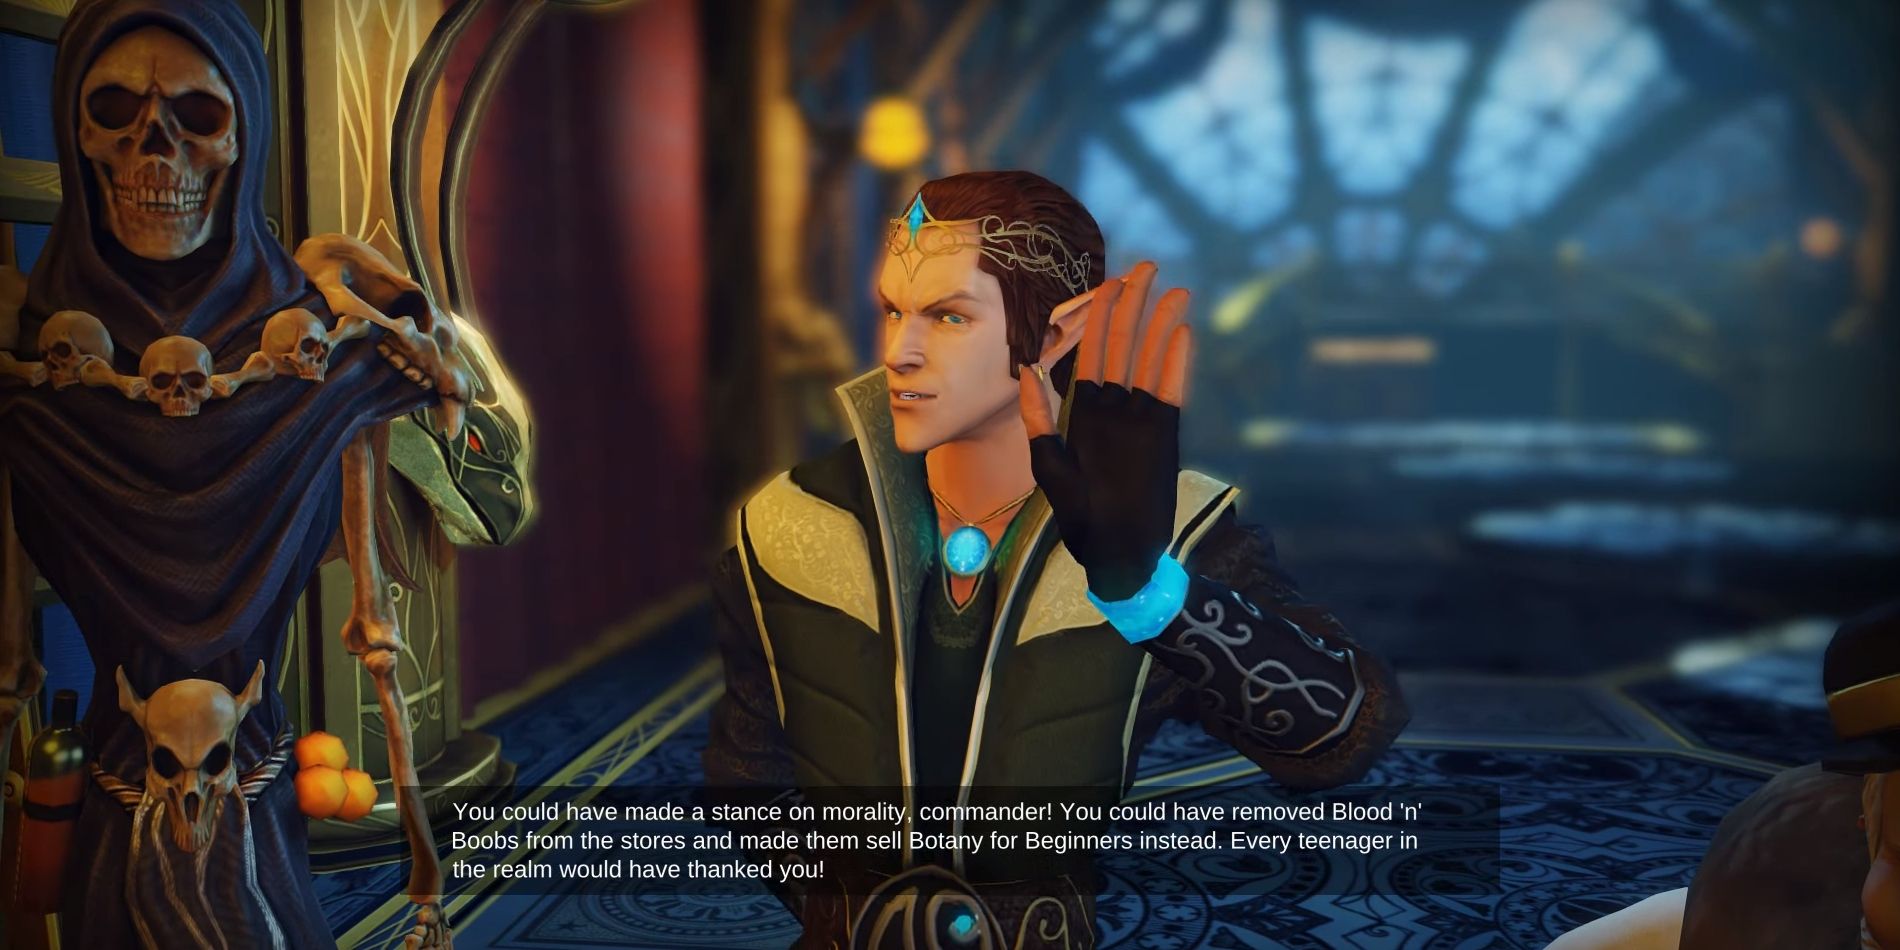 Divinity: Dragon Commander Uses Humor to Tell Divisive Political Stories